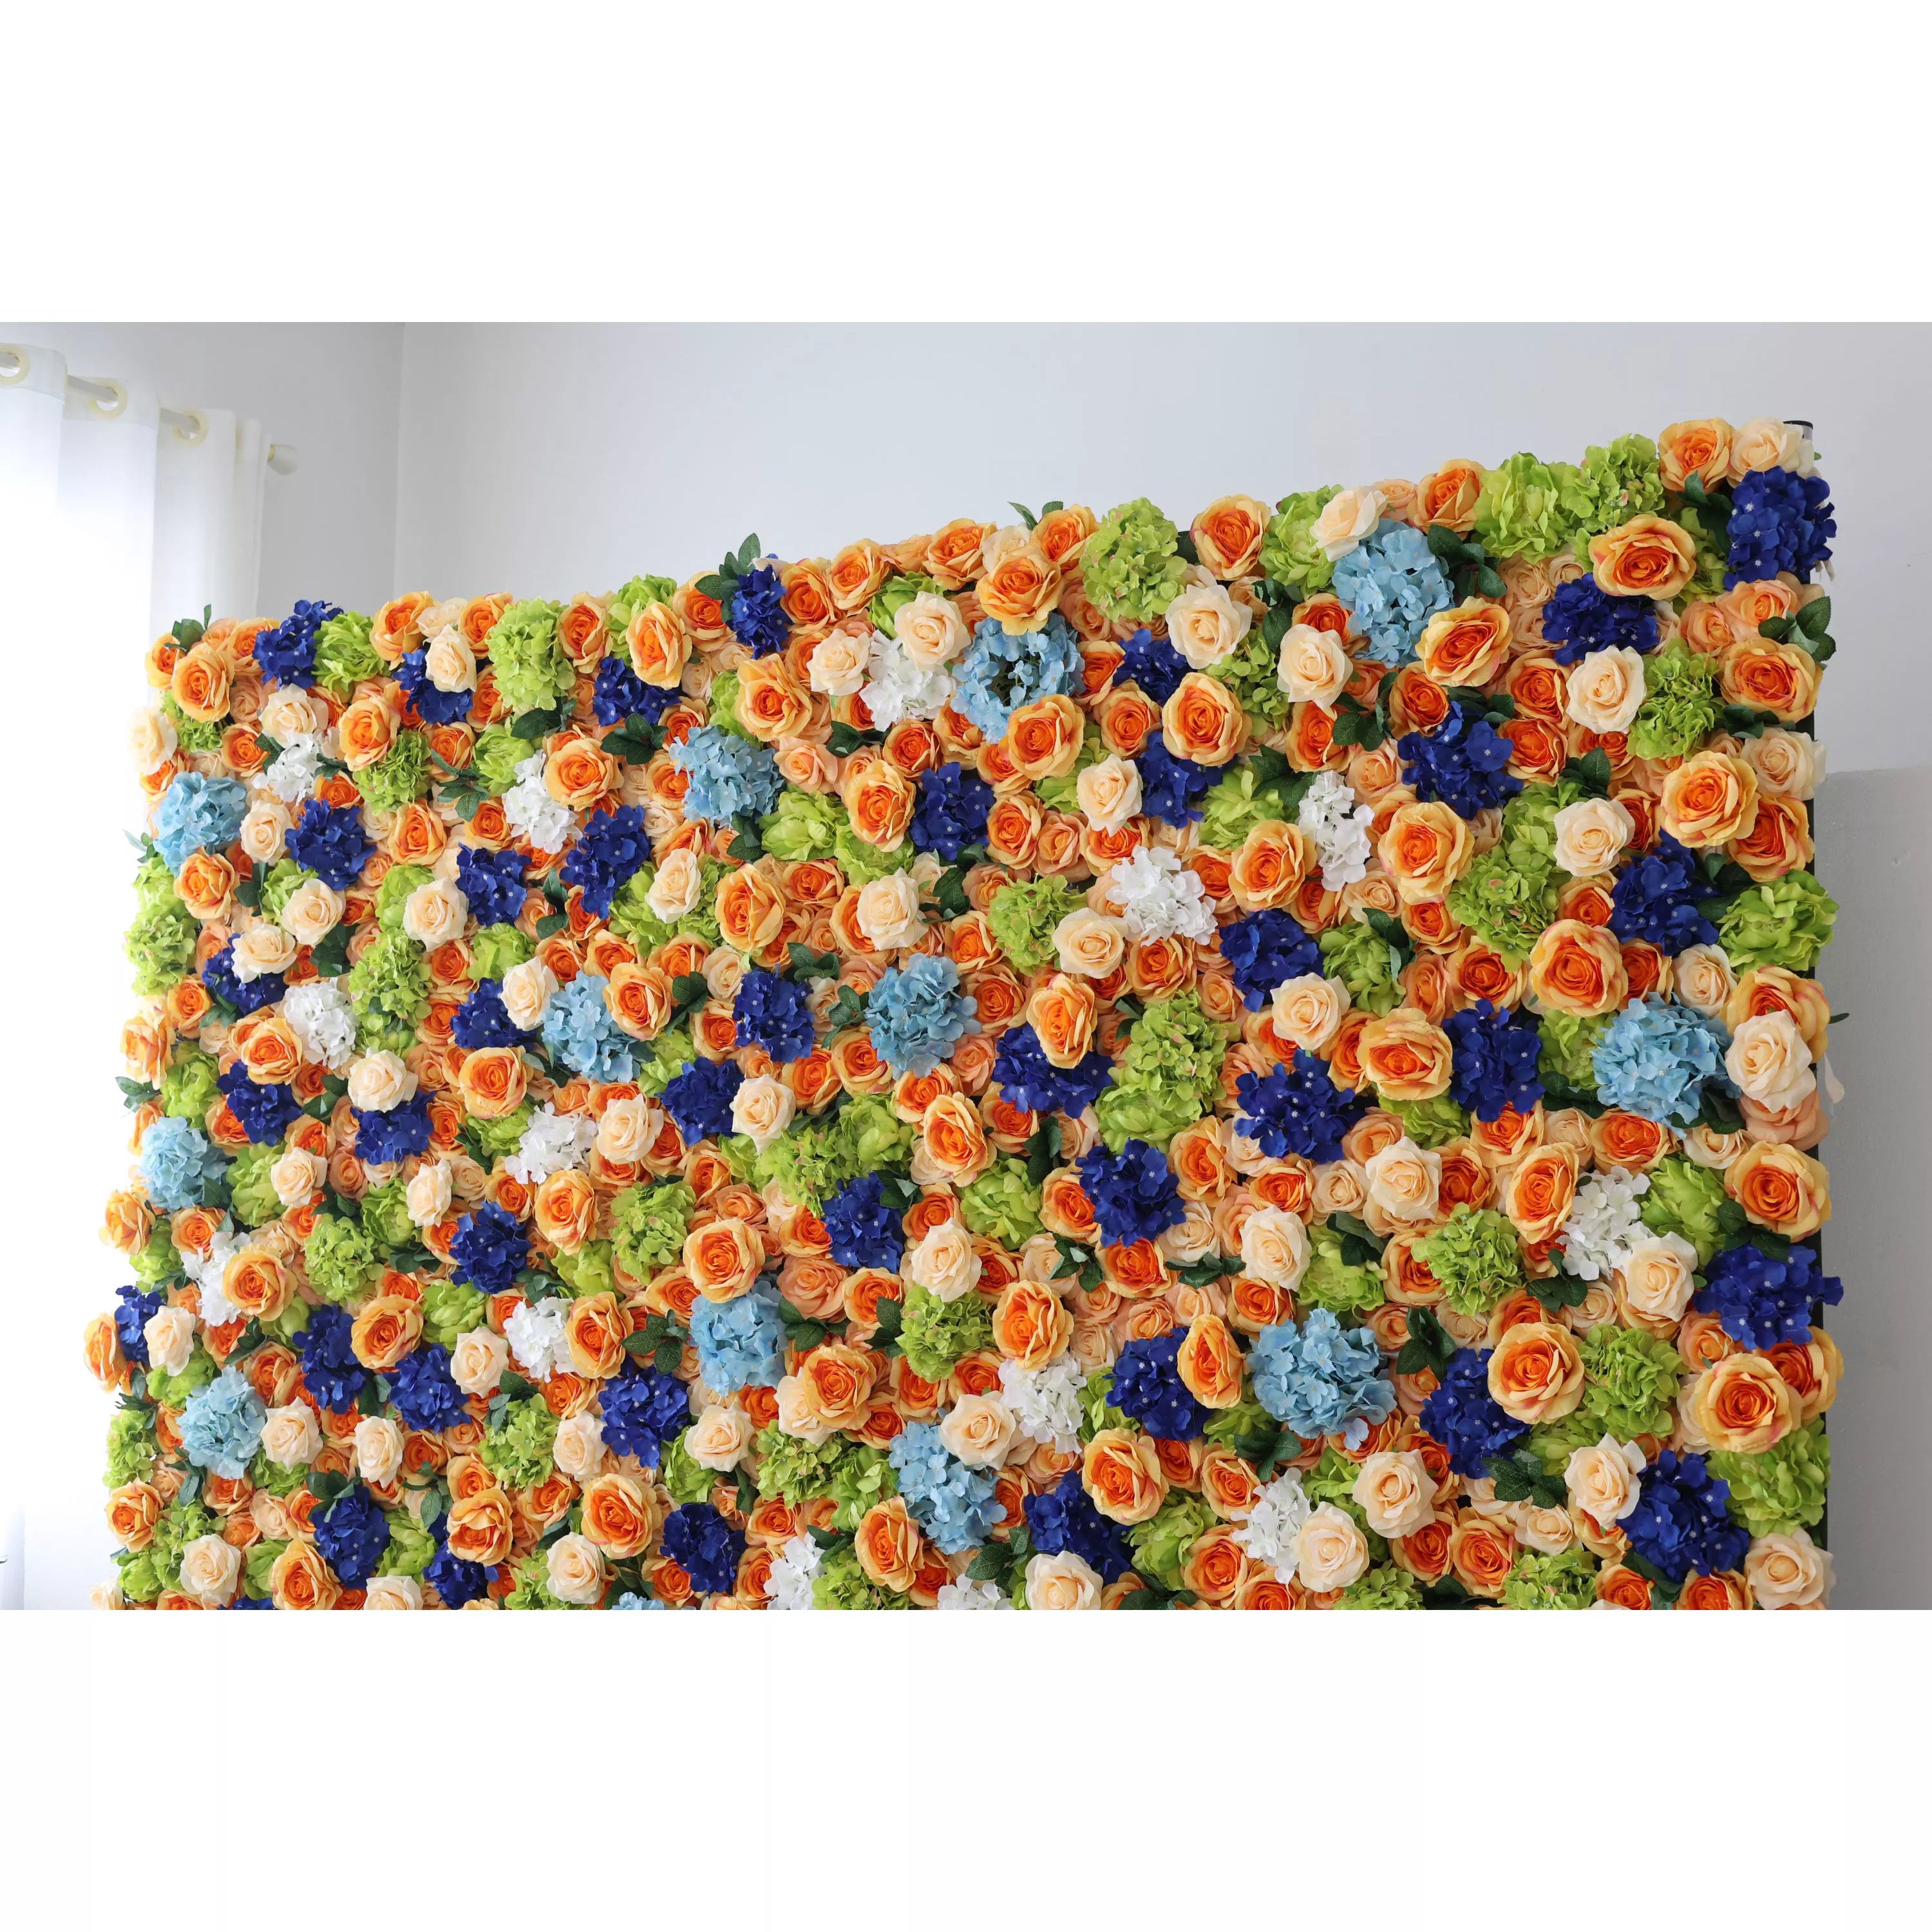 Valar Flowers Roll Up Artificial Flower Wall Backdrop: Vibrant Medley - From Colorful Celebrations to Calming Retreats-VF-229